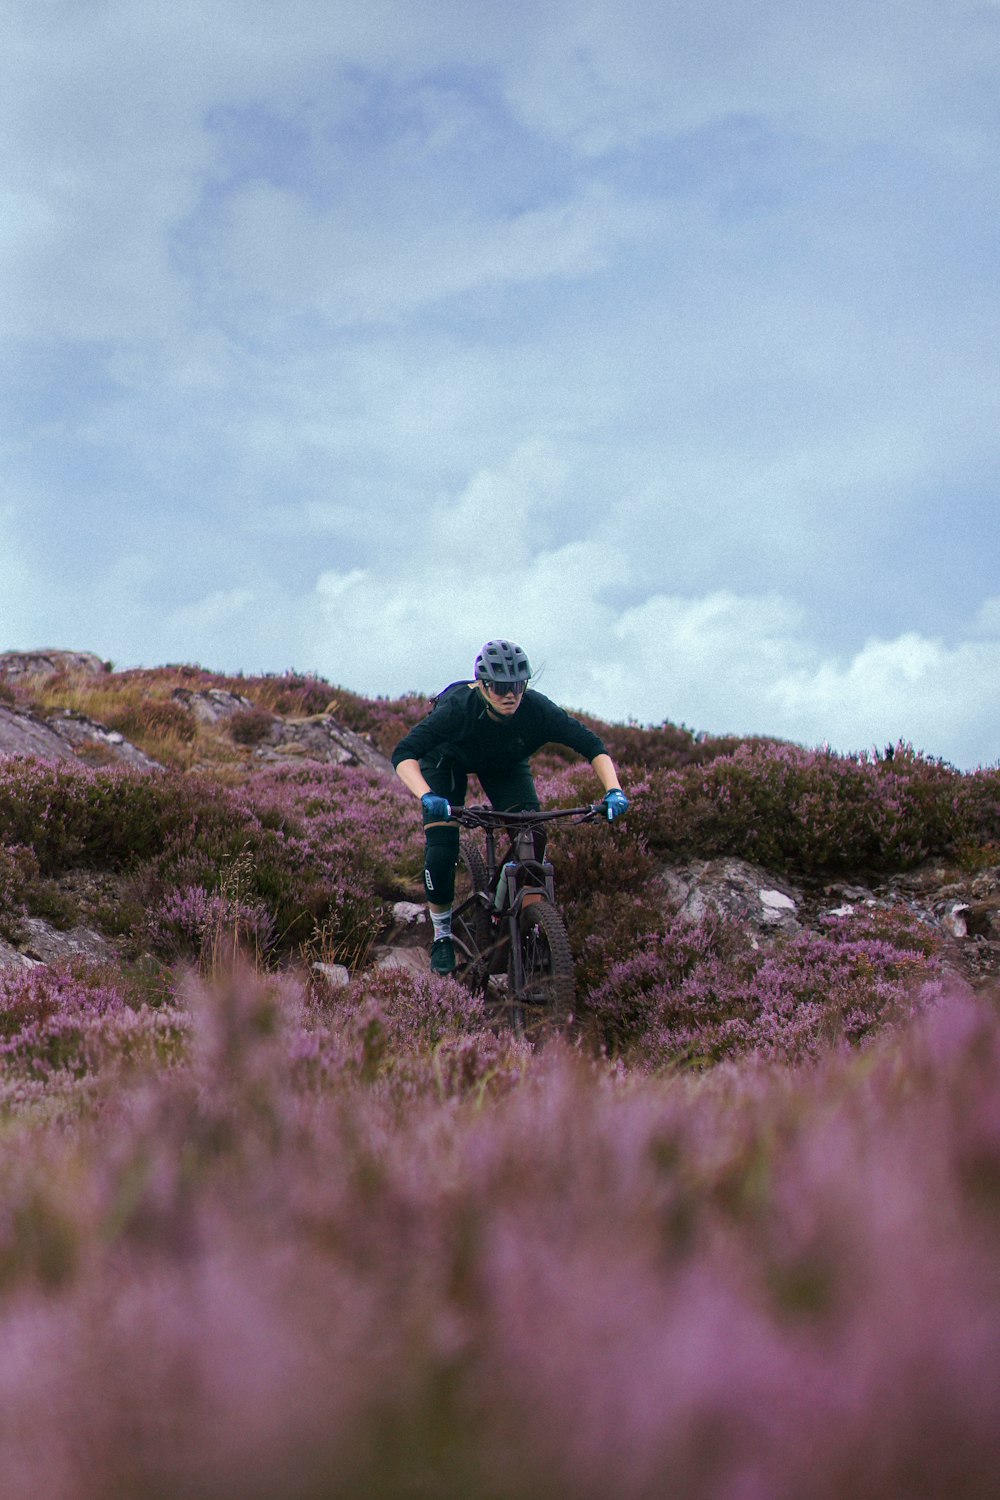 a person riding a bike on a trail in a field of purple flowers